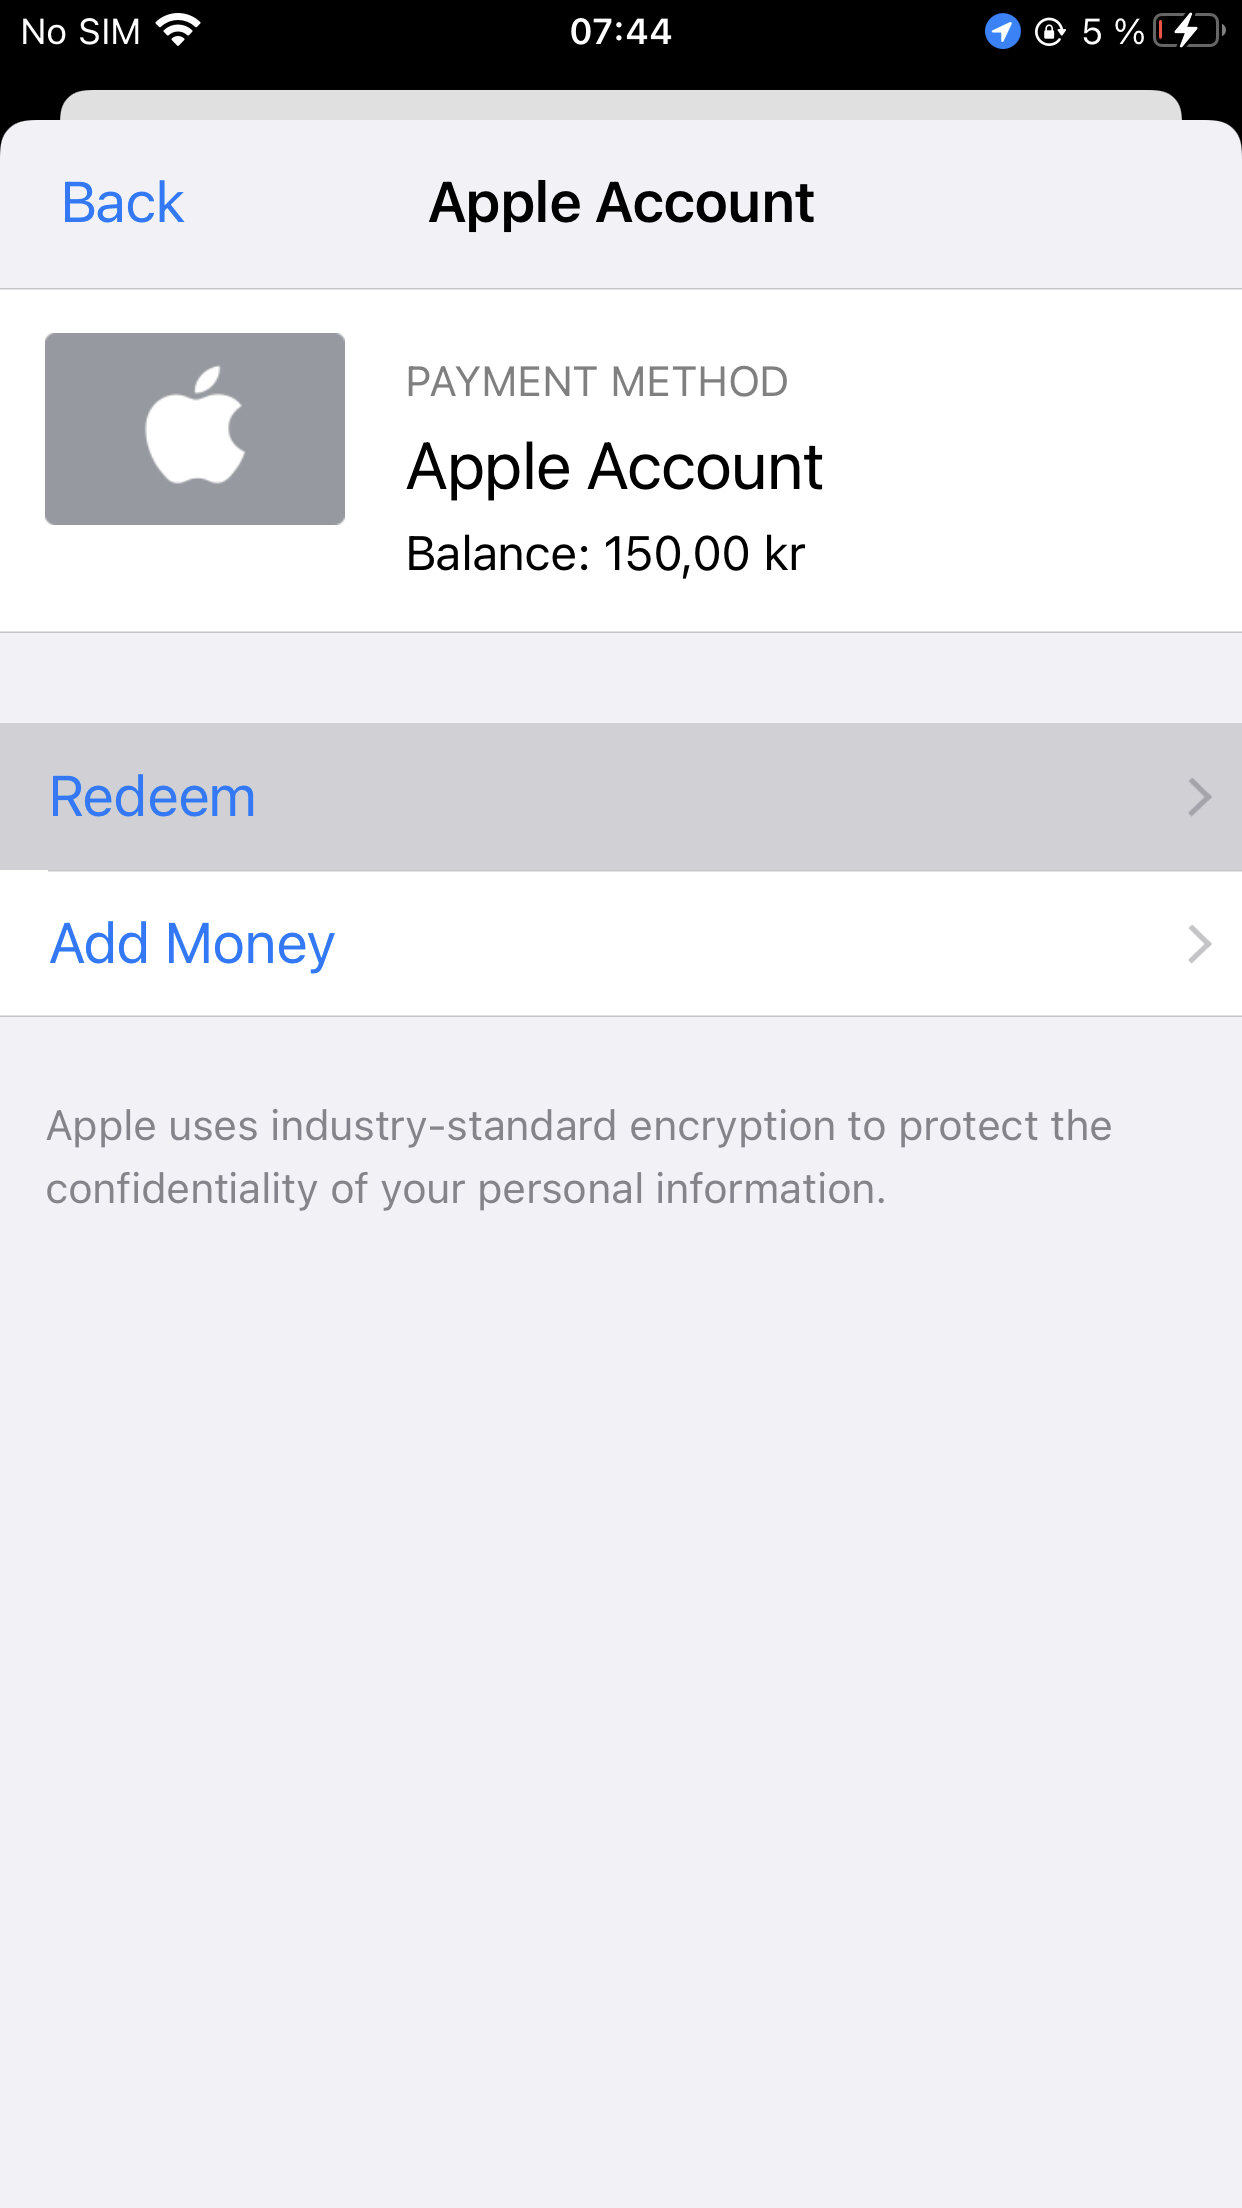 Add money to your Apple Account balance - Apple Support